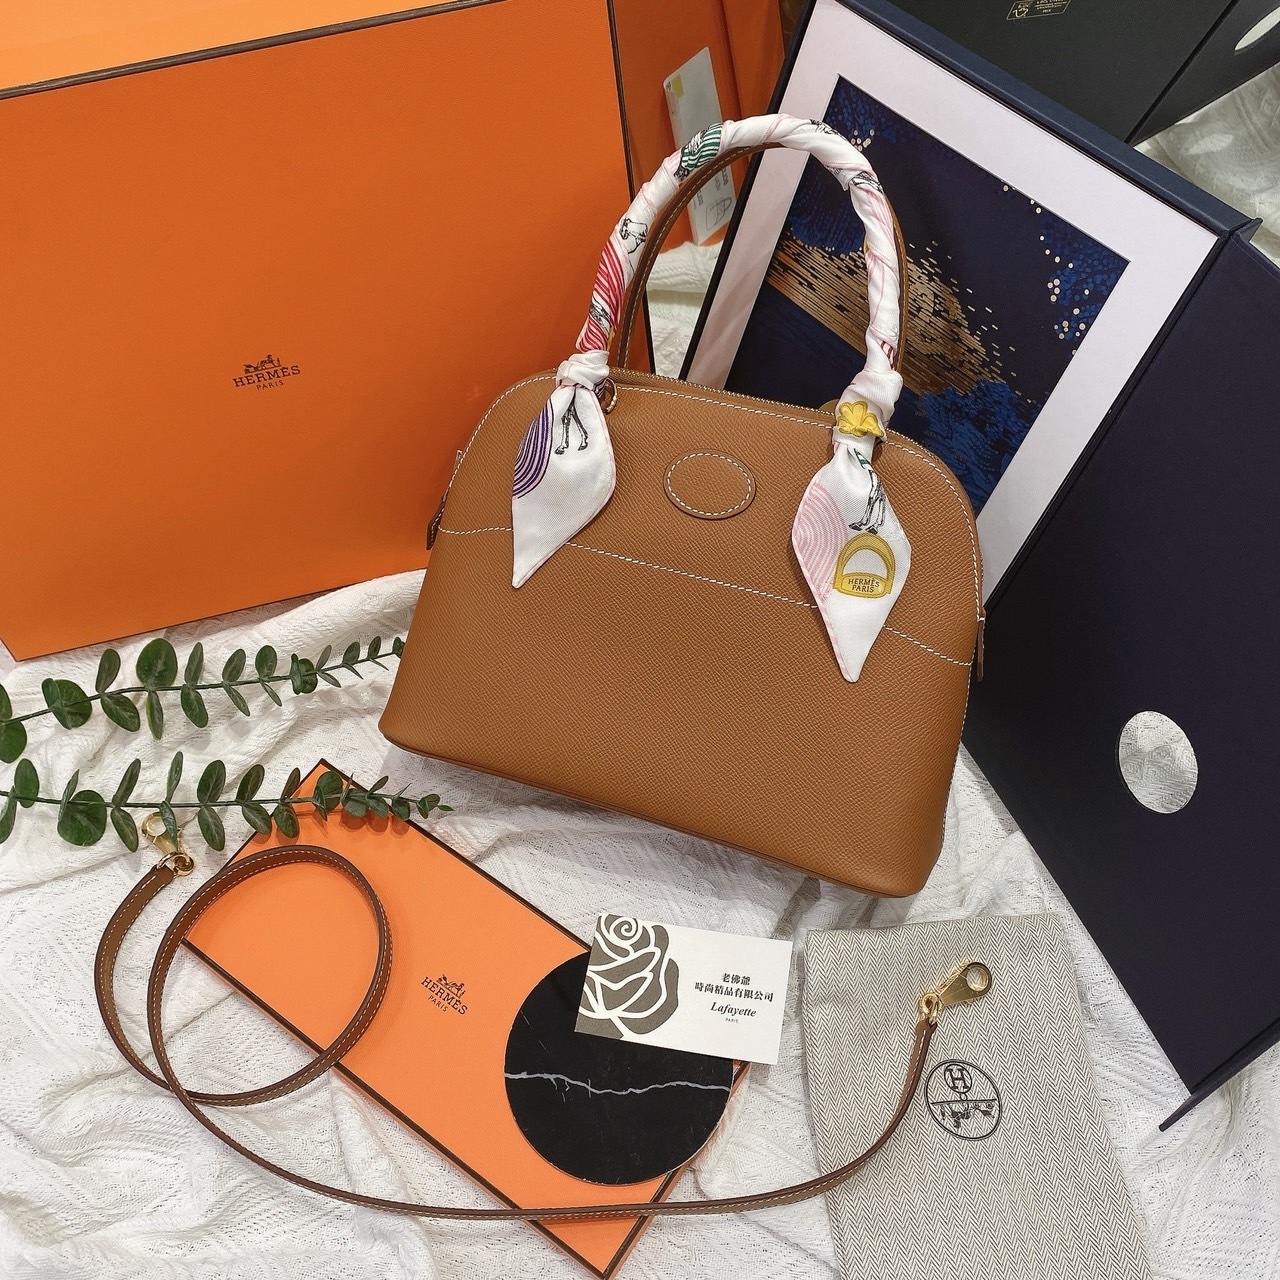 HERMES UNBOXING & REVIEW: Bolide 27 (Unboxing, History, Shopping  Experience) 